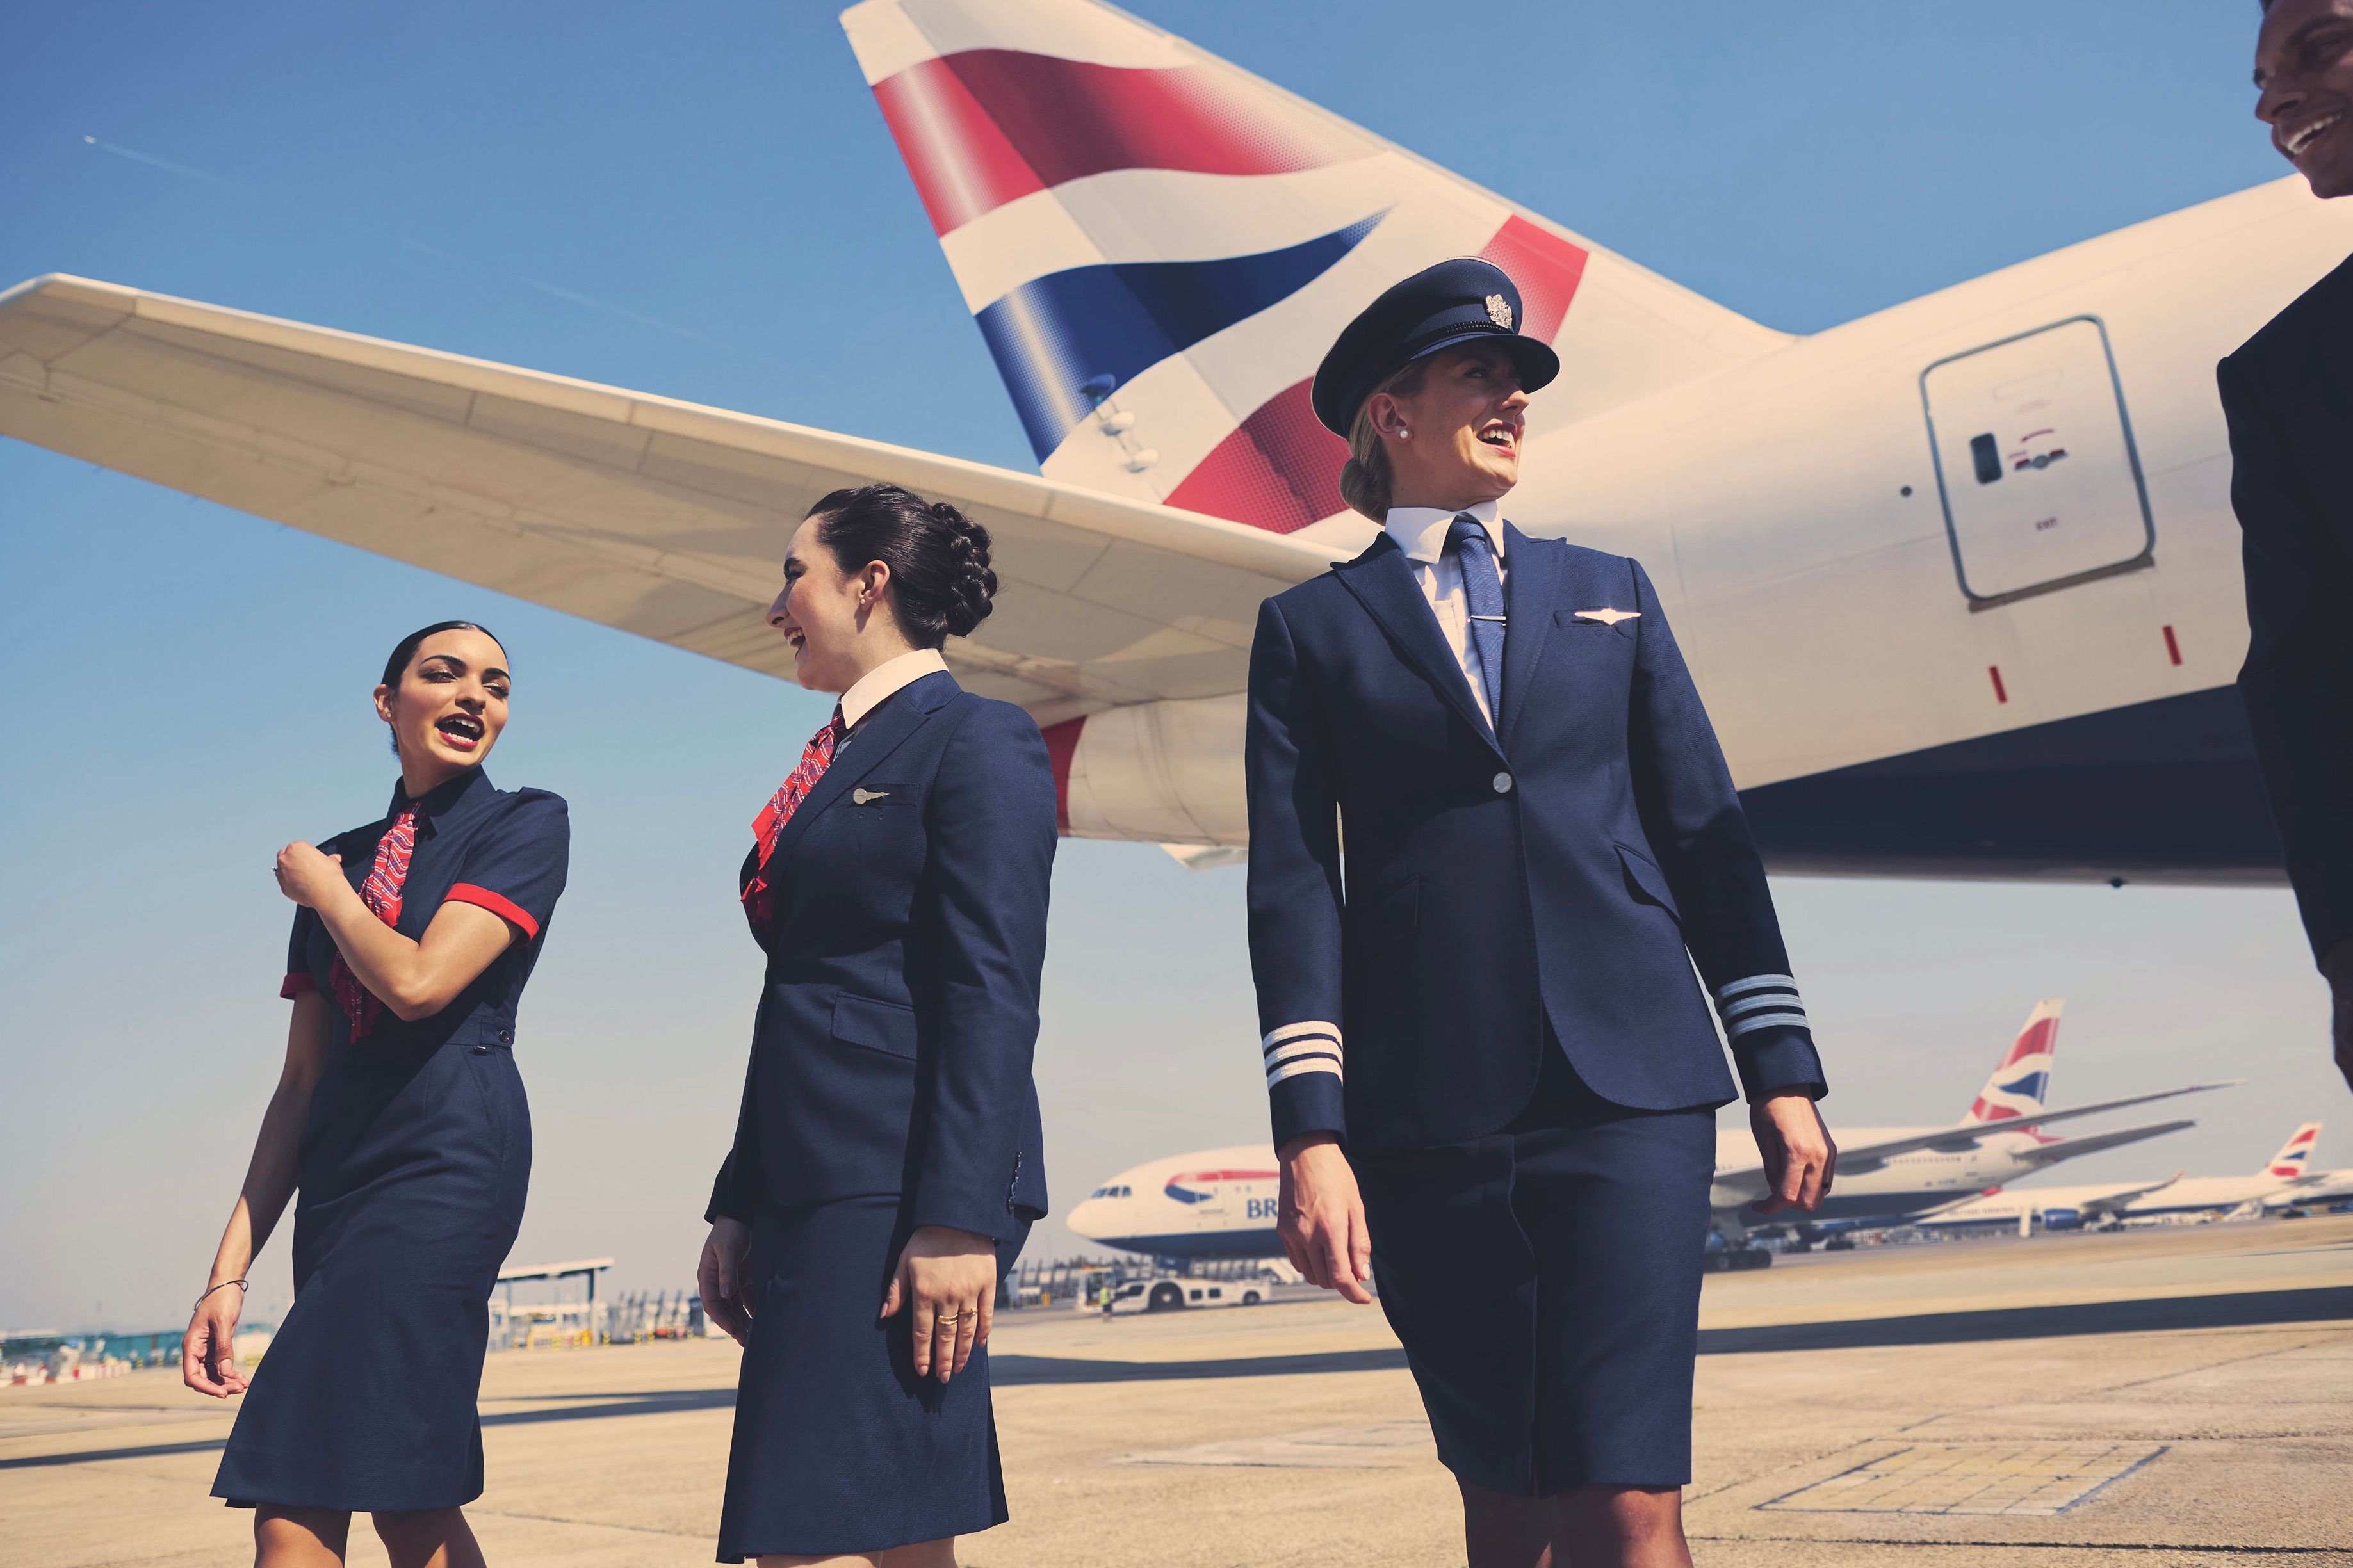 British Airways cabin crew and pilot and aircraft tail